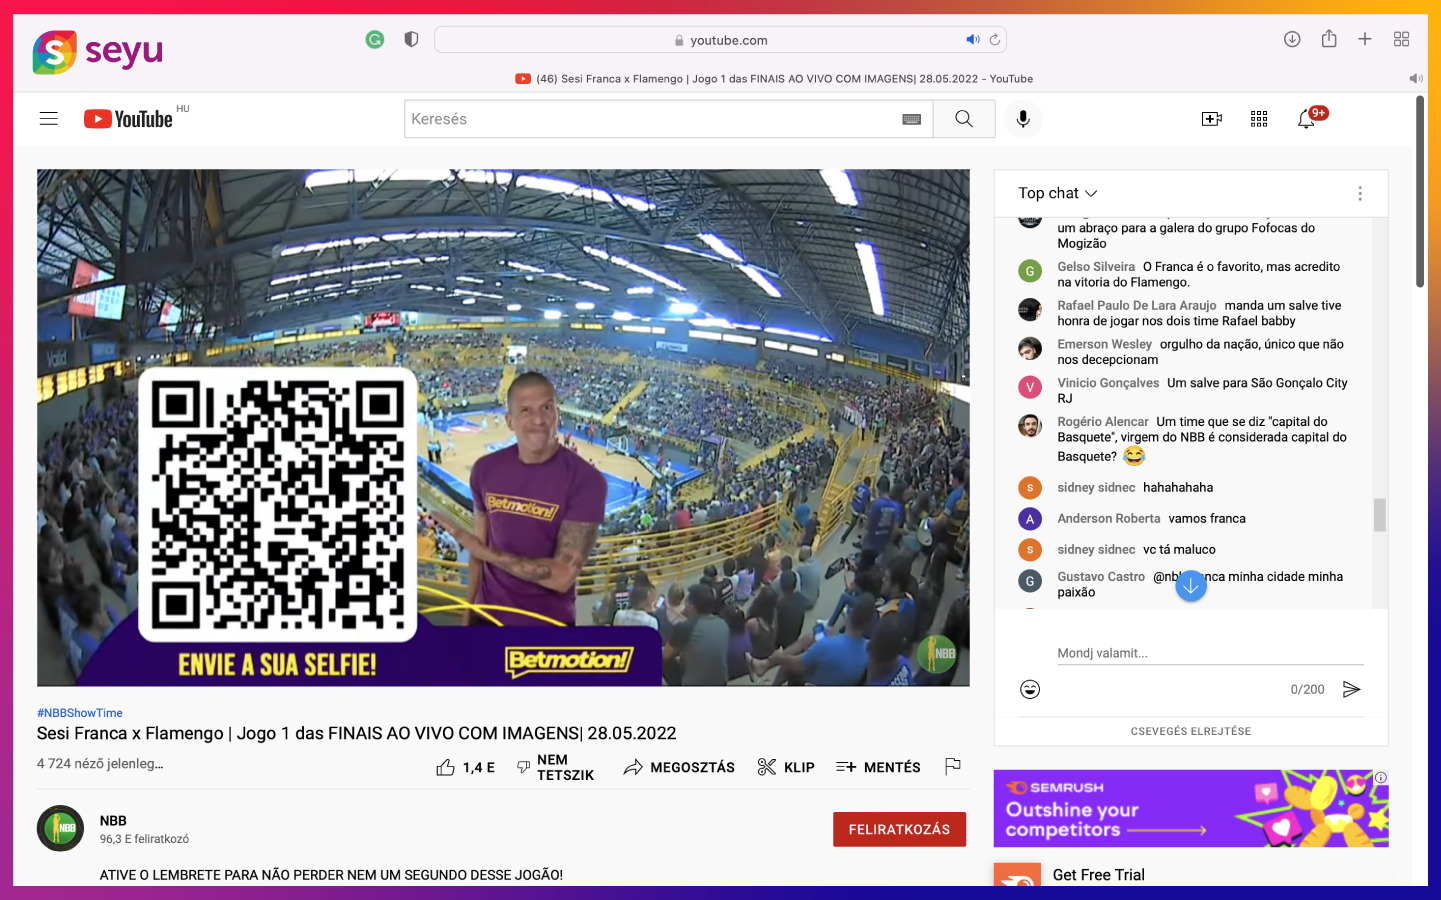 Betmotion lifted fan engagement to the next level for the Brazilian Basketball Championship Finals!